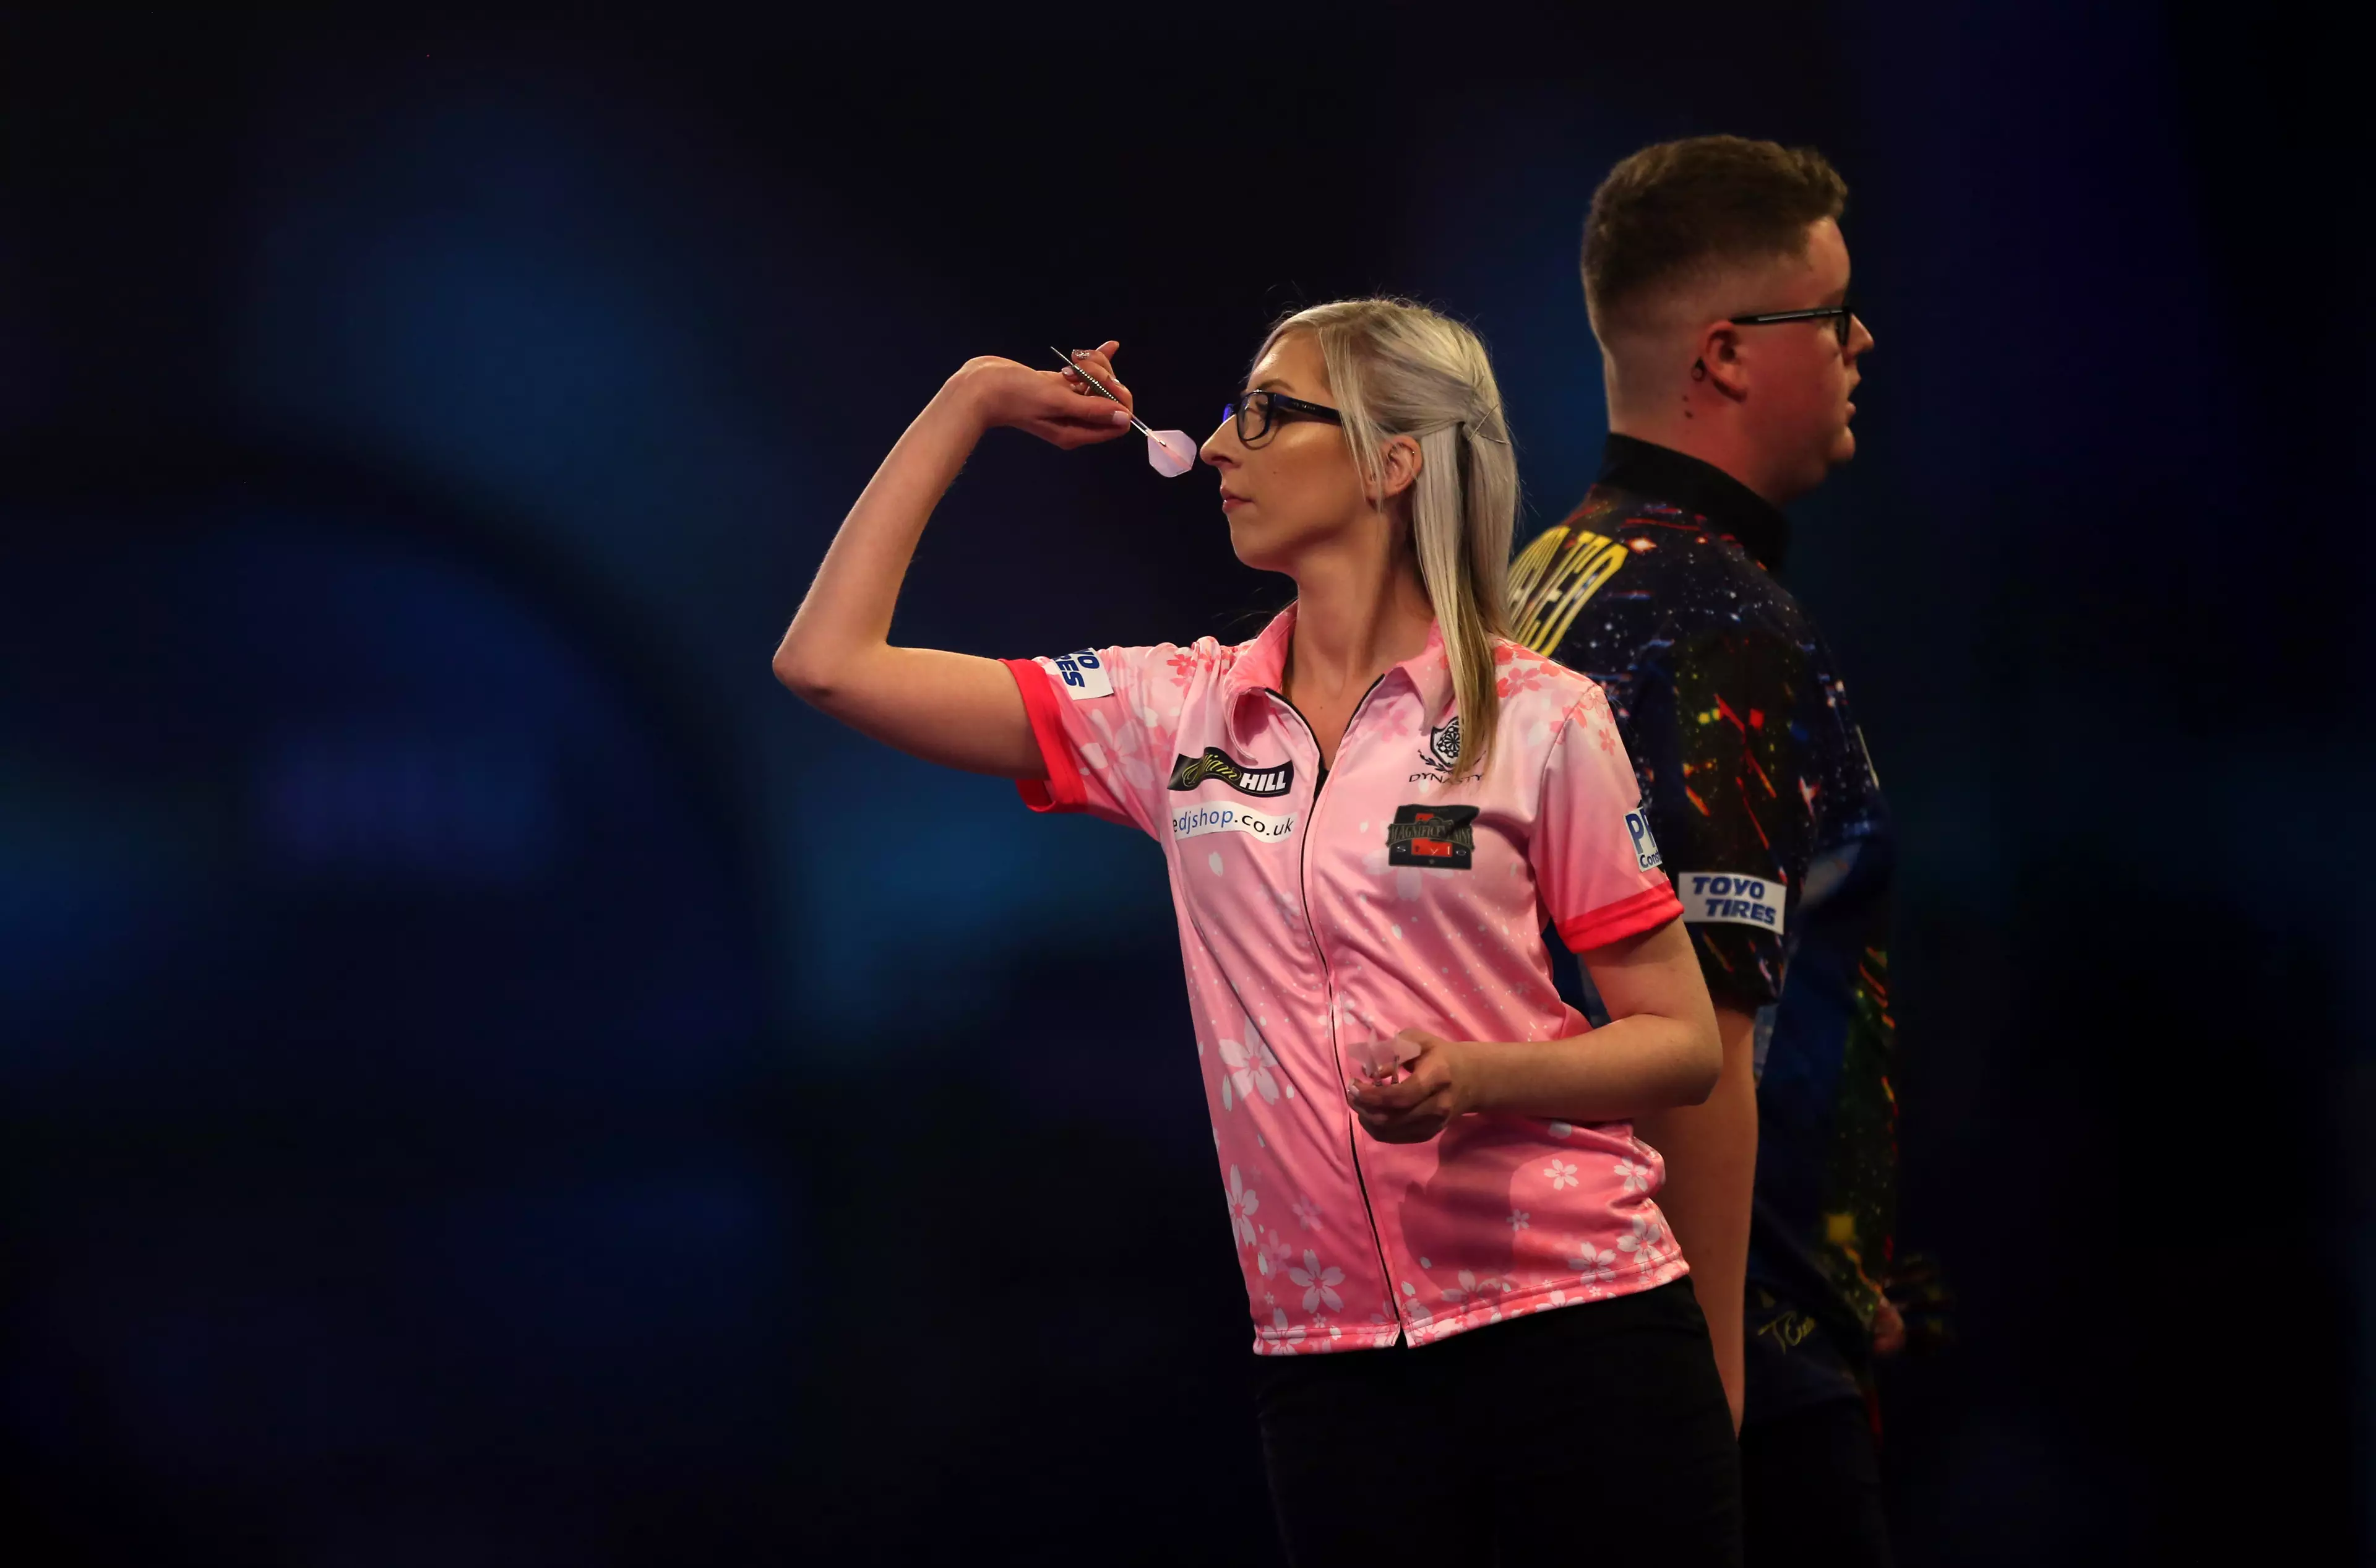 Sherrock stunned the crowd in London to defeat Ted Evetts in the PDC World Championships.